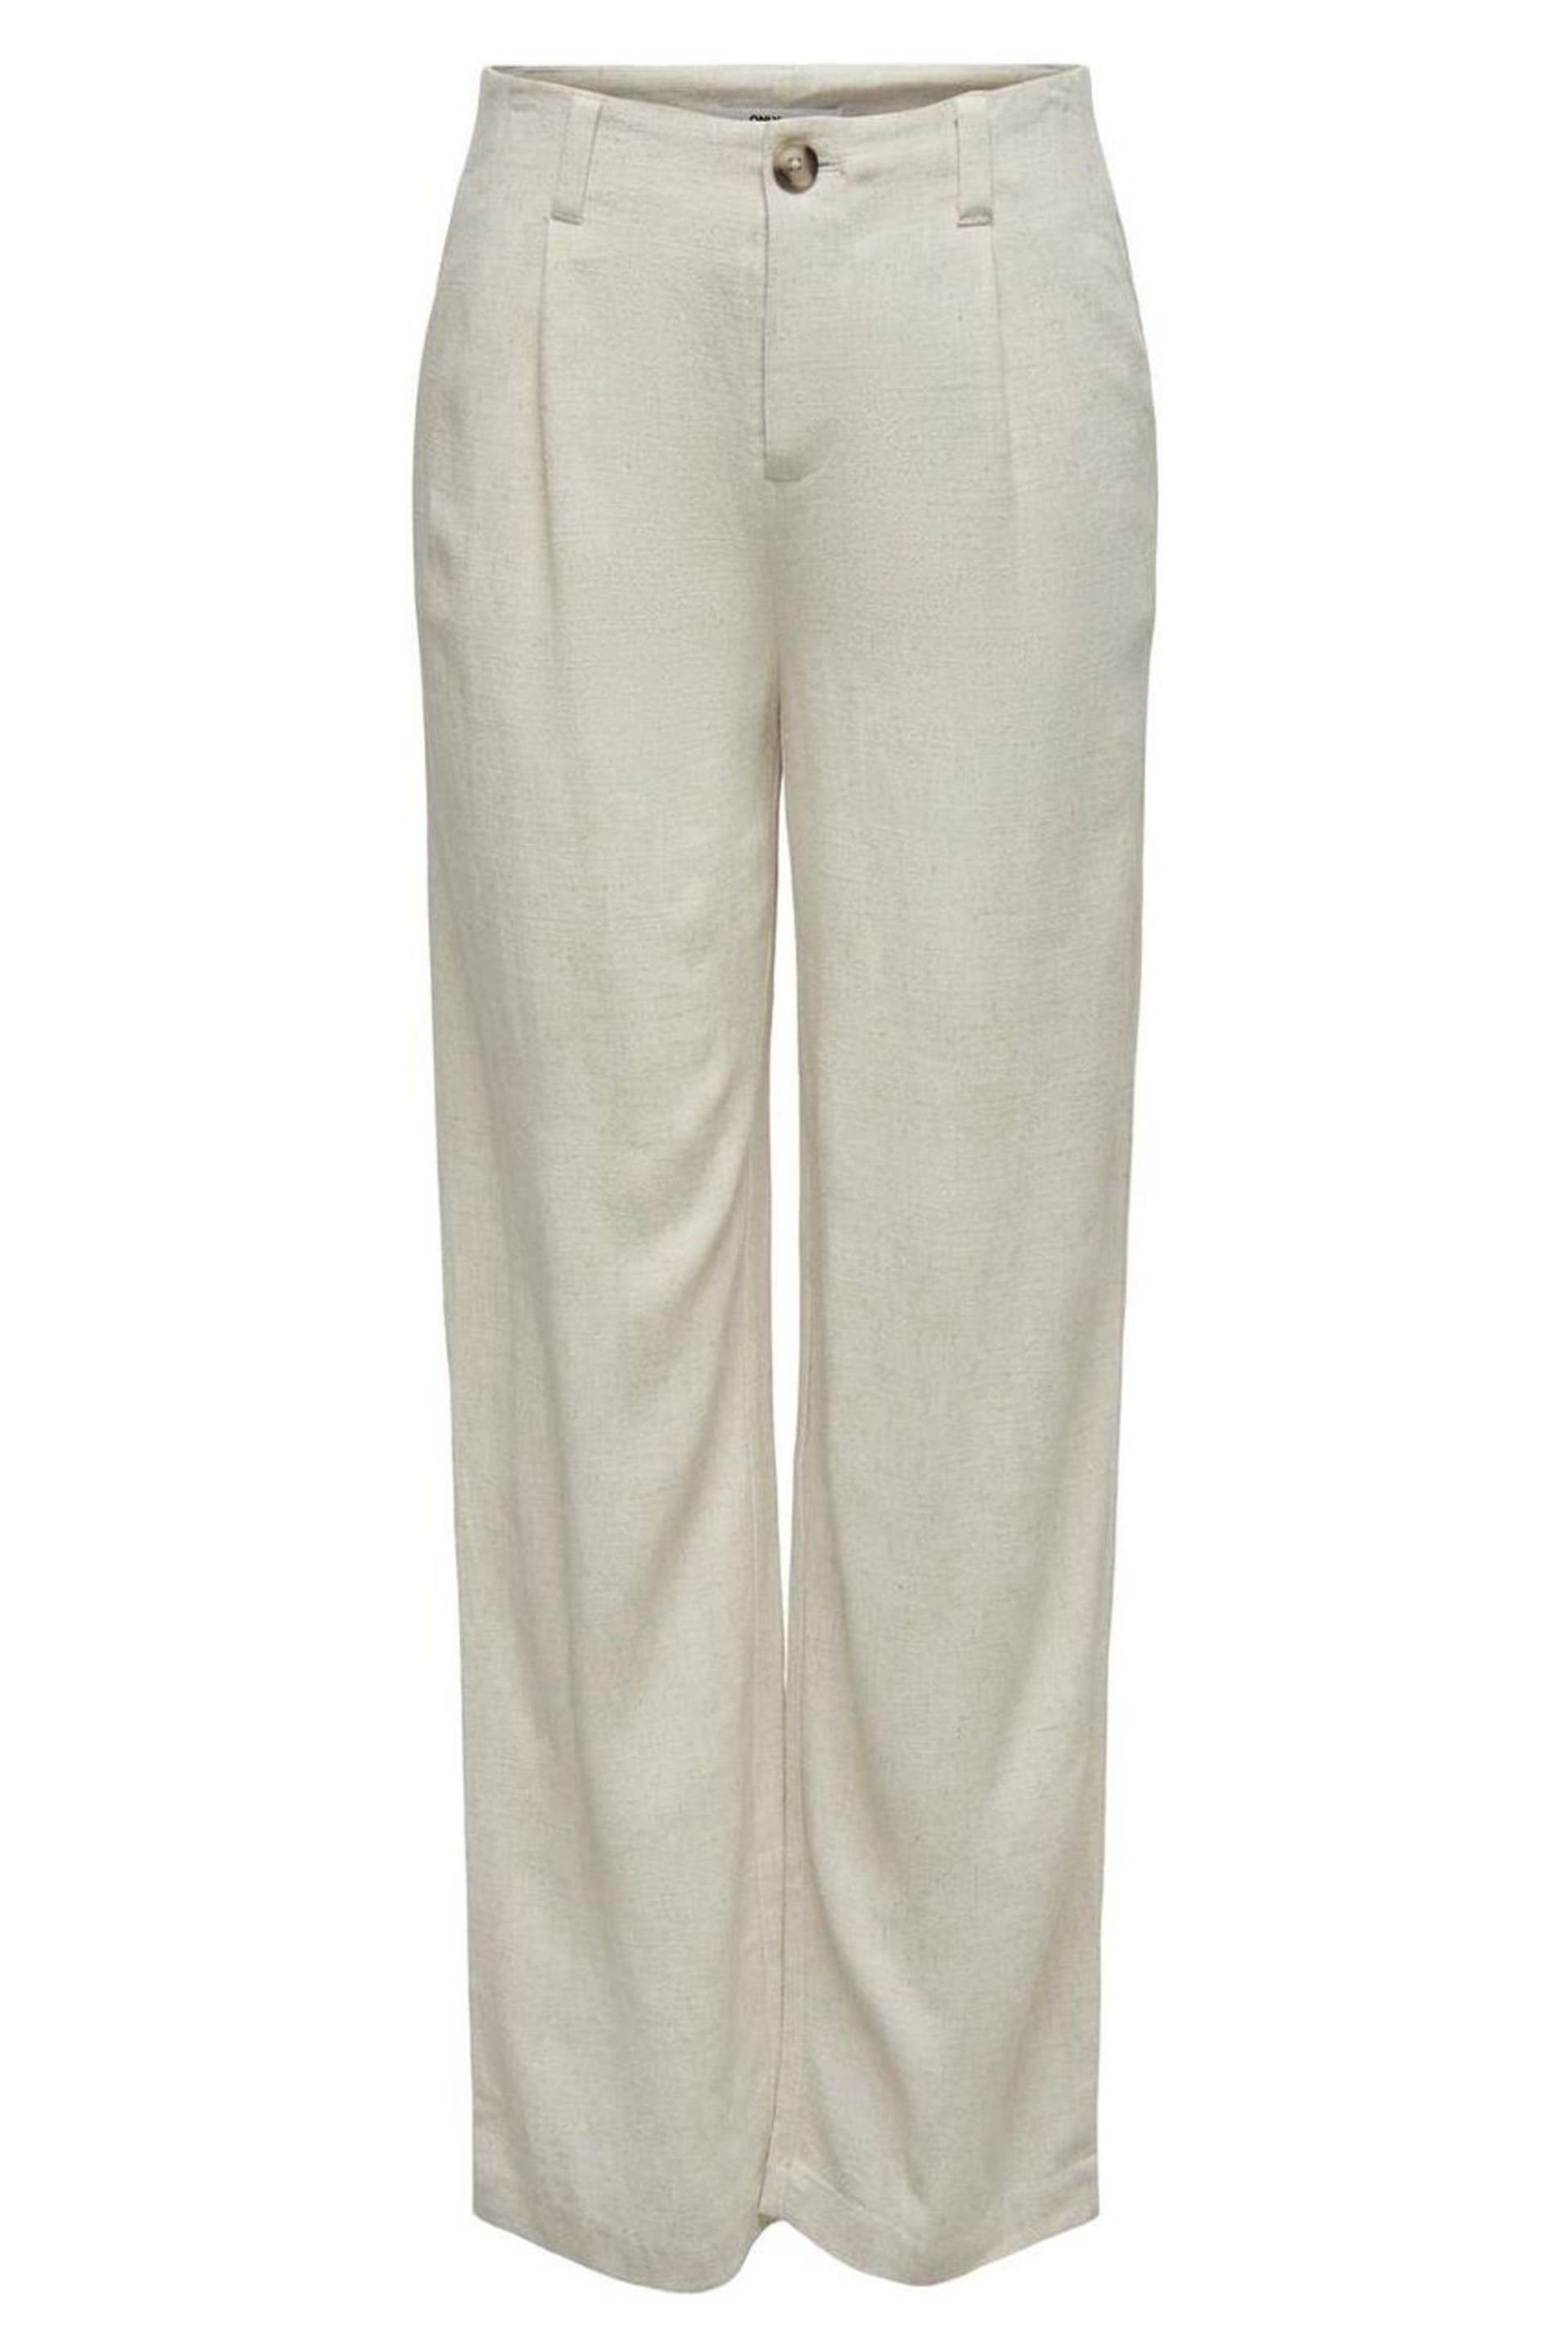 ONLY Cream Tailored Wide Leg Trousers With A Touch Of Linen - Image 1 of 3